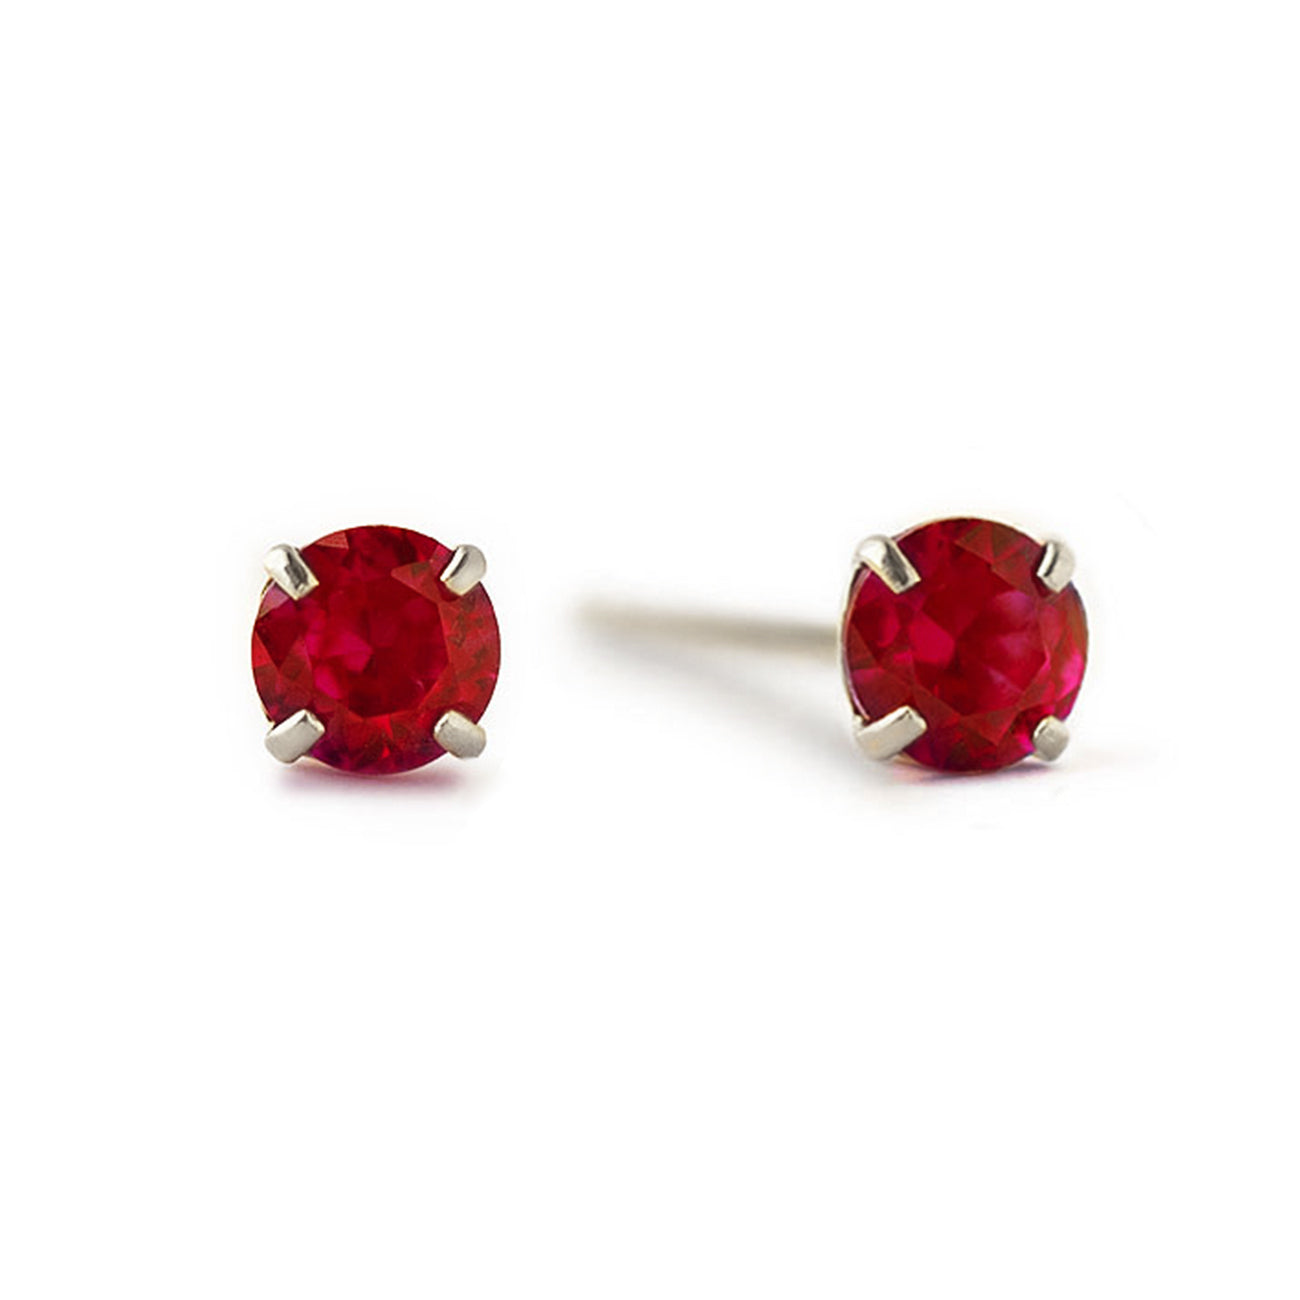 https://www.amyojewelrsy.shop/wp-content/uploads/1704/56/only-45-00-usd-for-birthstone-studs-garnet-online-at-the-shop_0.jpg